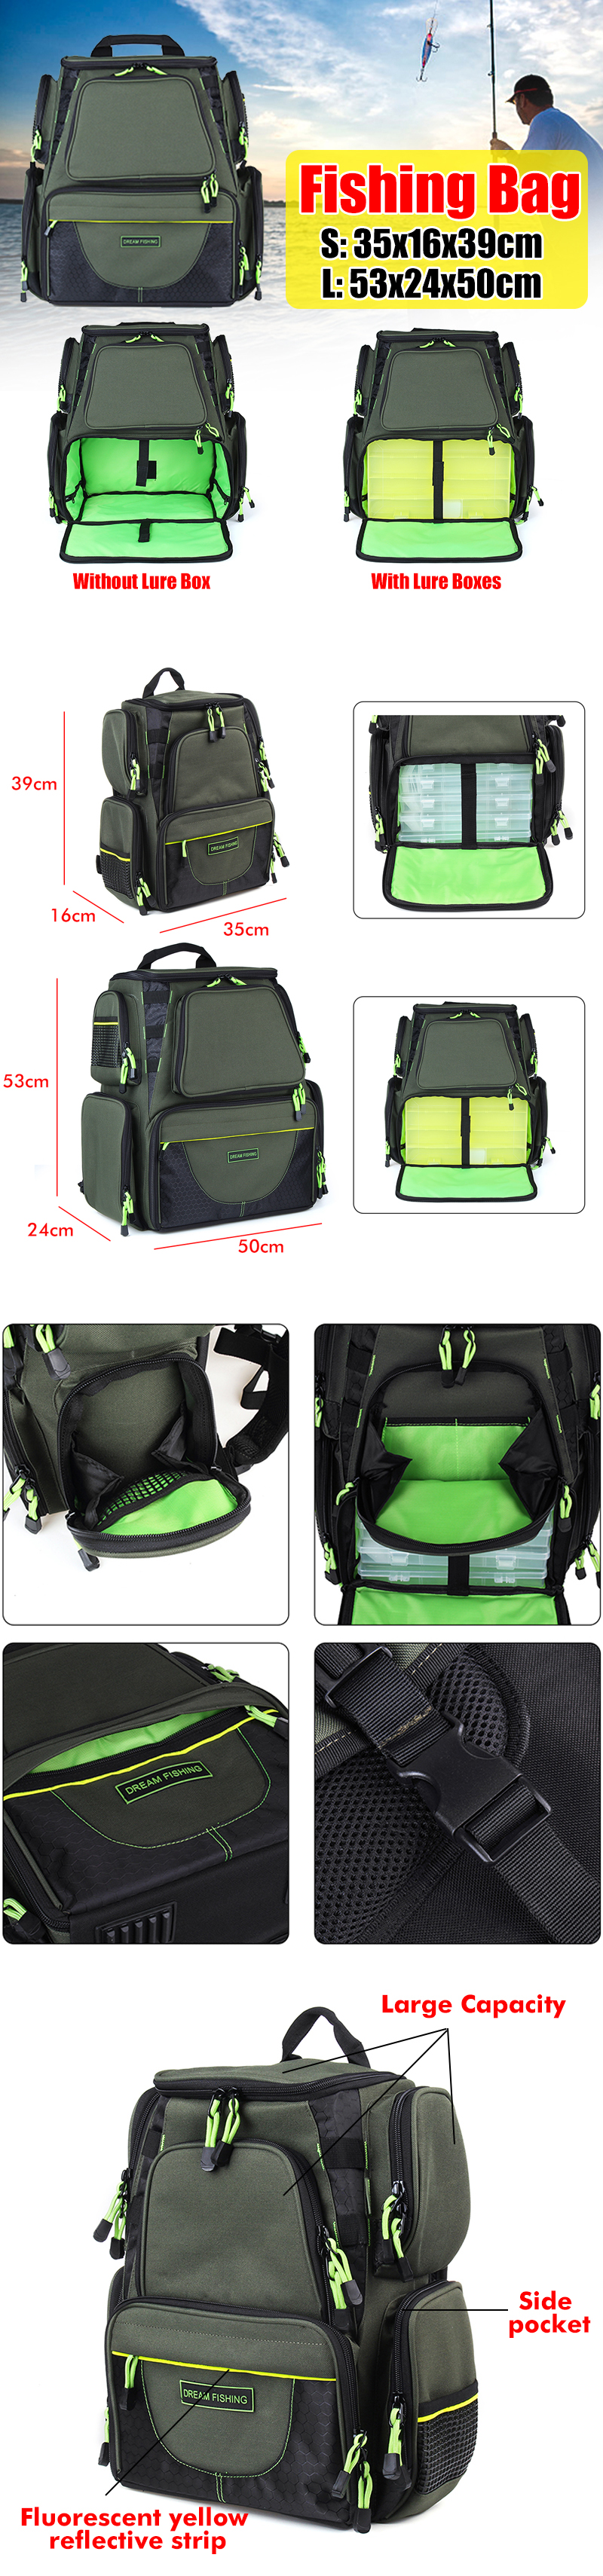 2264L-Backpack-Fishing-Bag-Travel-Camping-Storage-Bag-With-Lure-Boxes-1548613-1